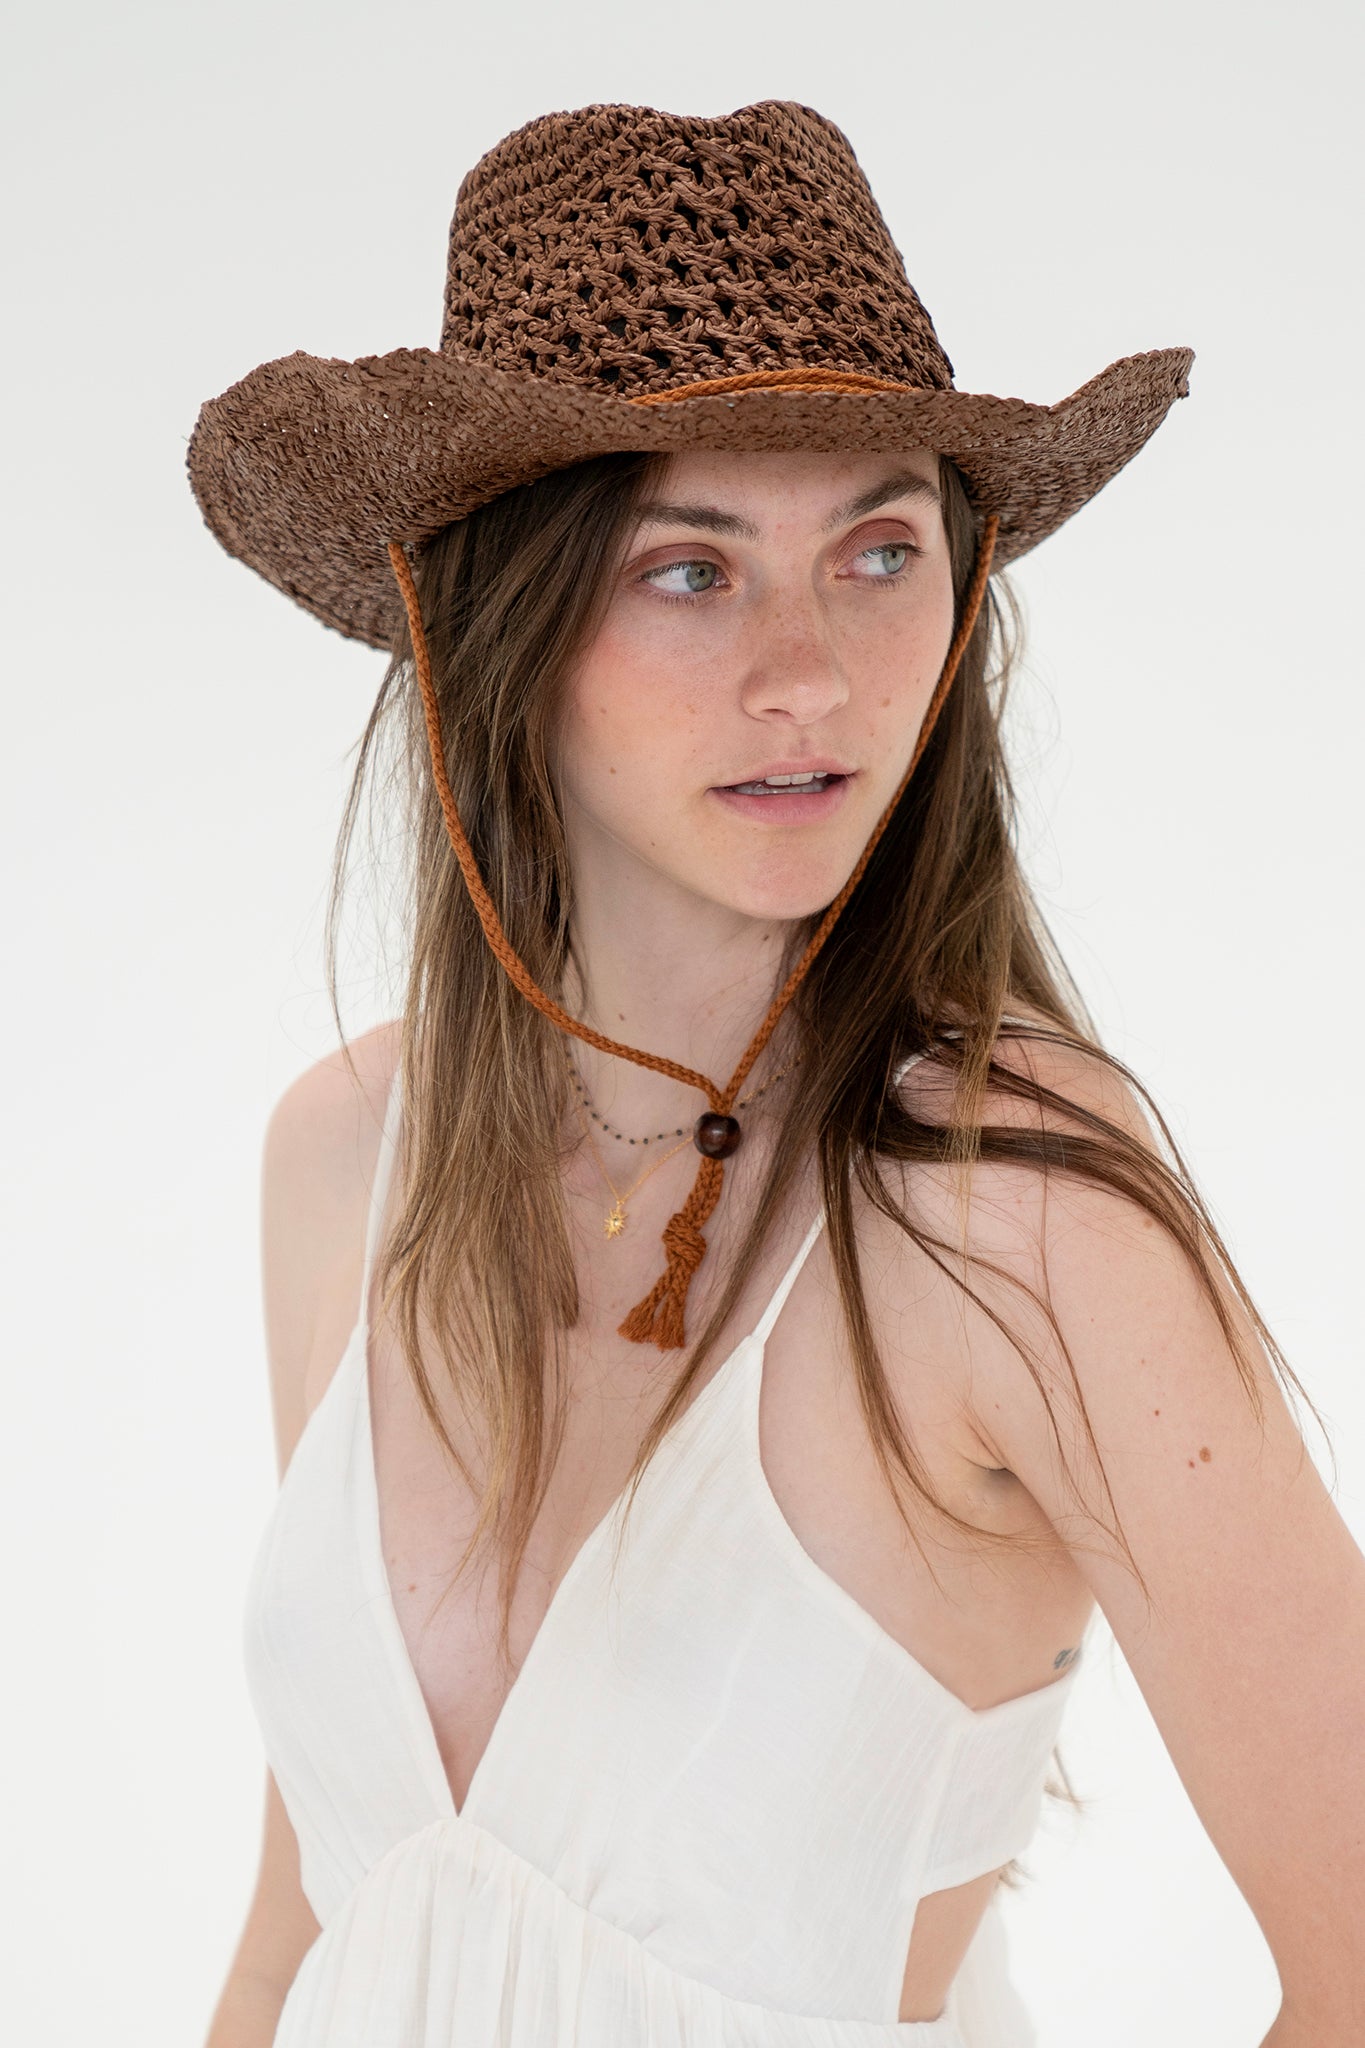 View 1 of Brown Cowboy Hat, a Hats from Larrea Cove. Detail: Get beach-ready with this awesome Brown Cowboy Hat! With its western style and straw f...